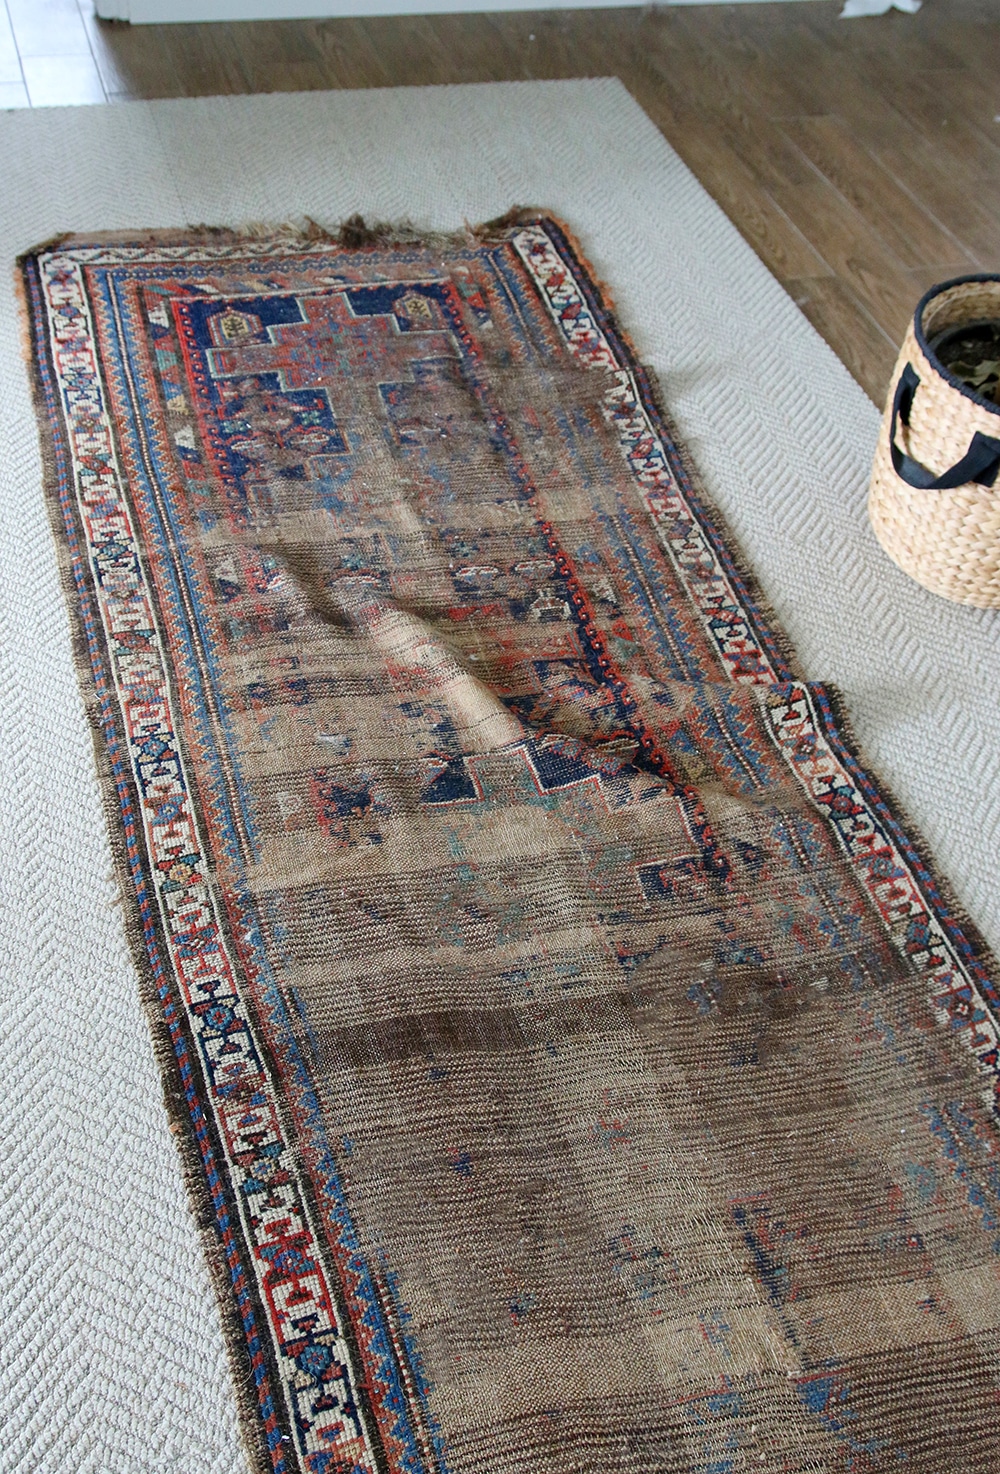 5 Tips For Keeping Area Rugs Exactly, How To Stop A Carpet Rug From Slipping